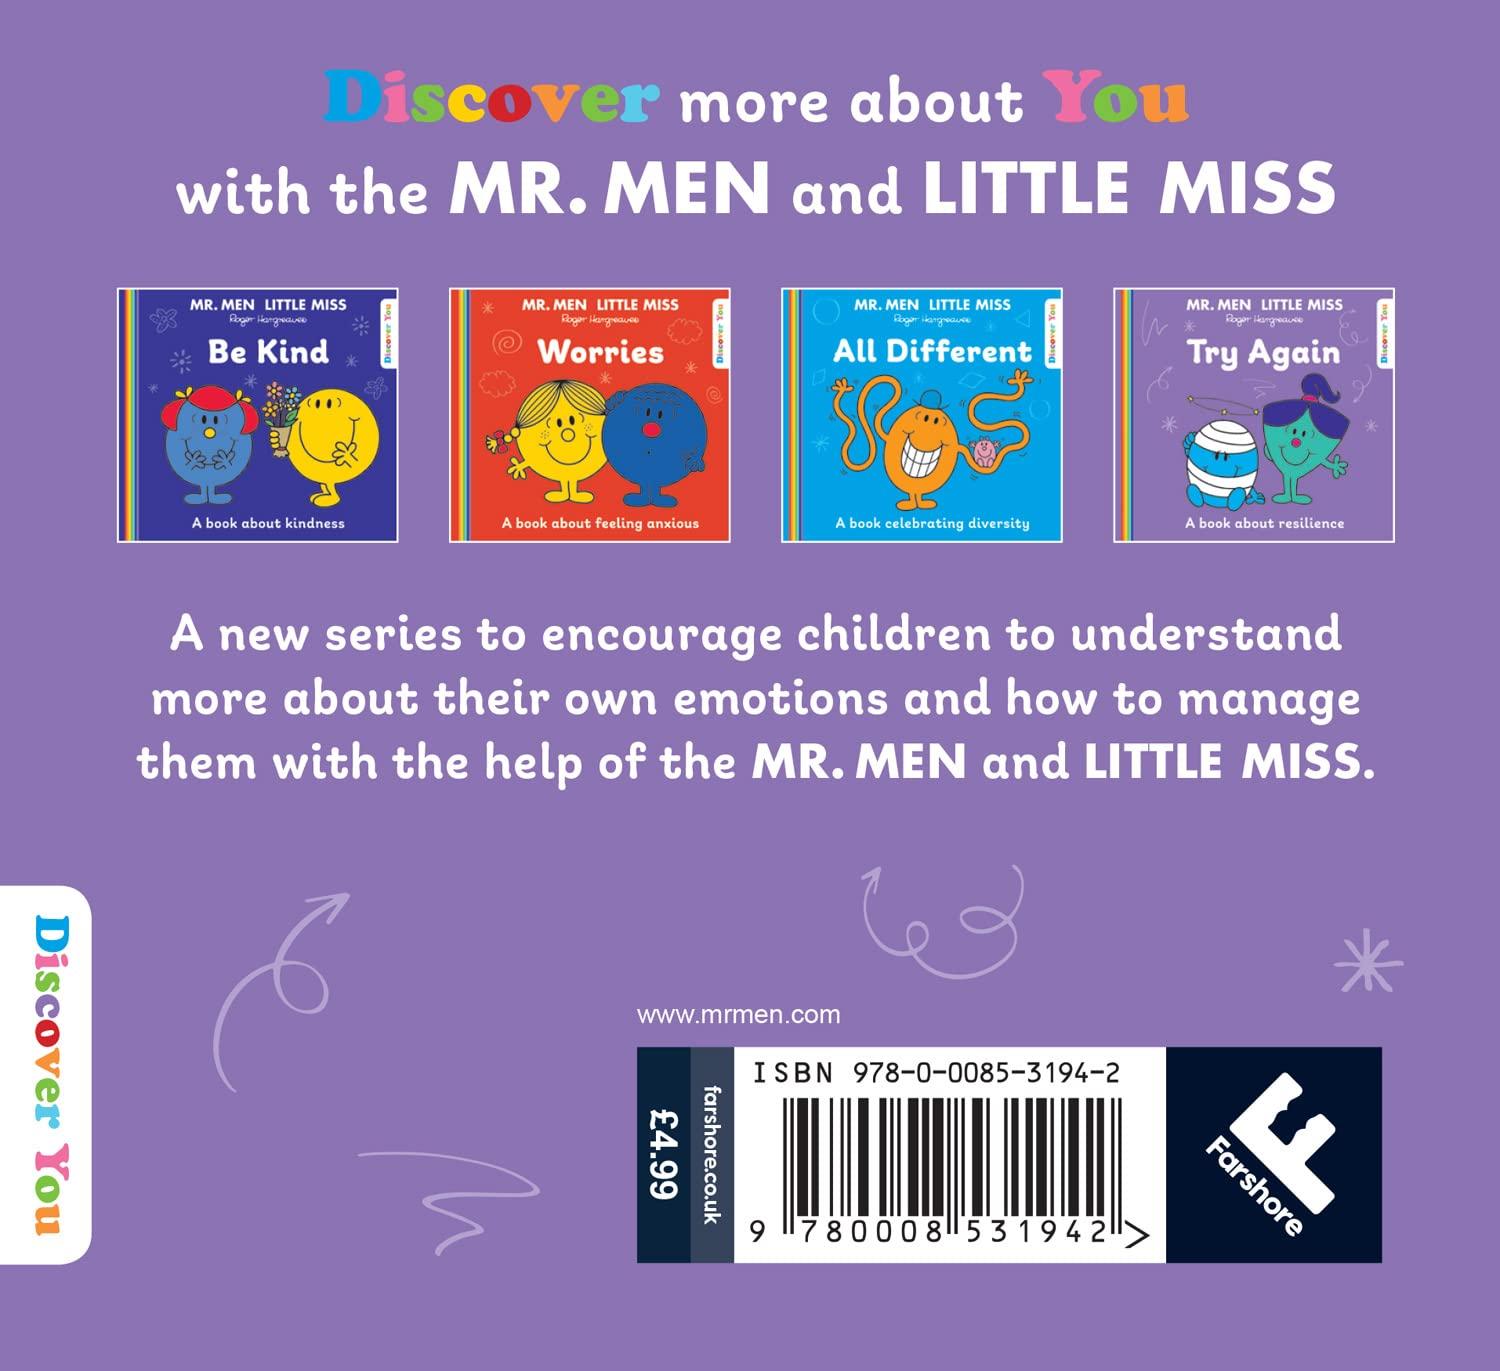 Truyện đọc thiếu nhi  tiếng Anh: Mr. Men and Little Miss Discover You — MR. MEN LITTLE MISS: TRY AGAIN